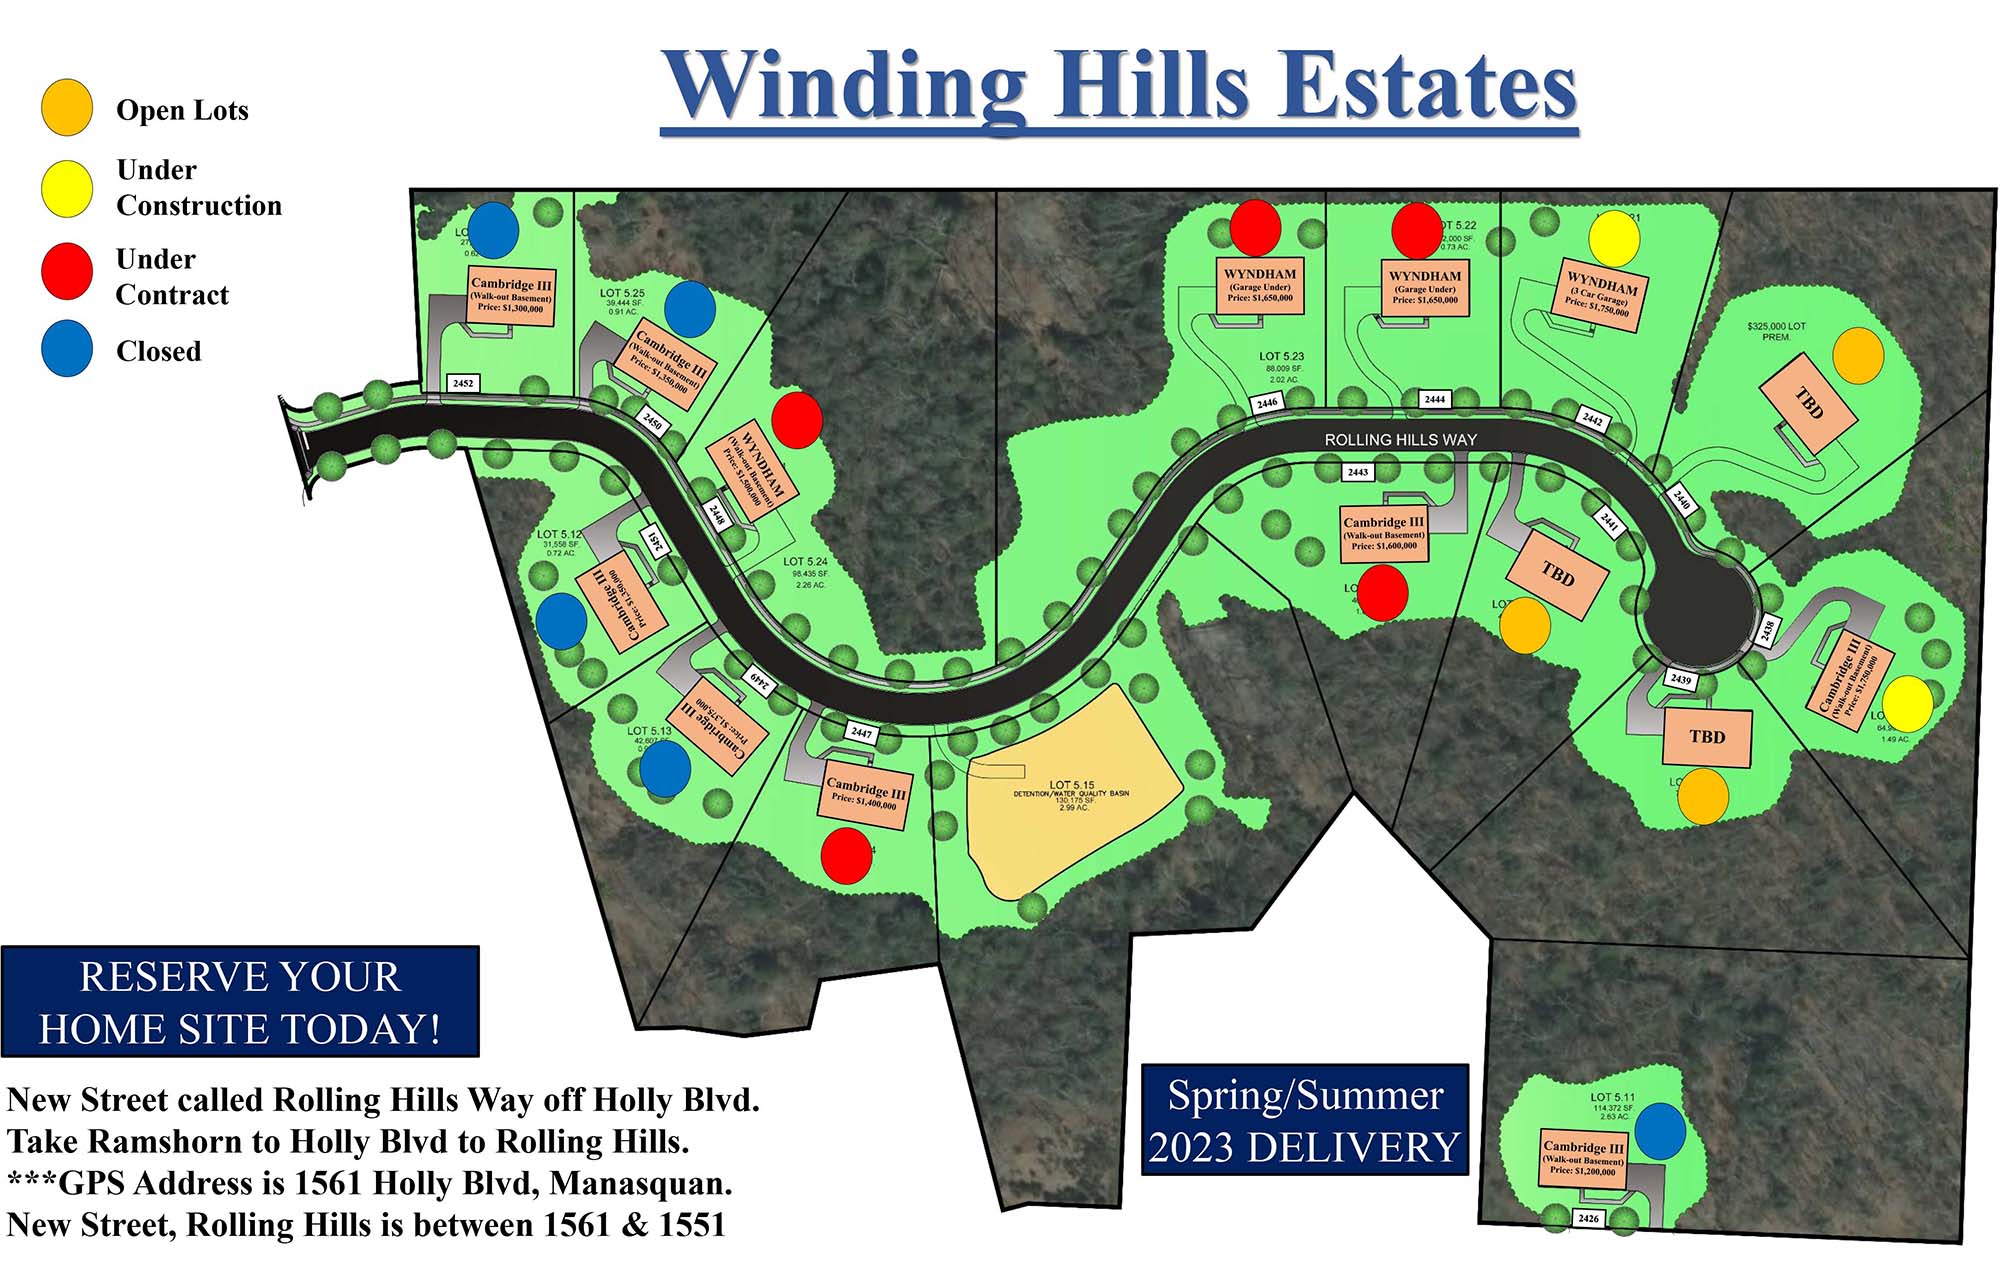 Winding Hills Available Lots